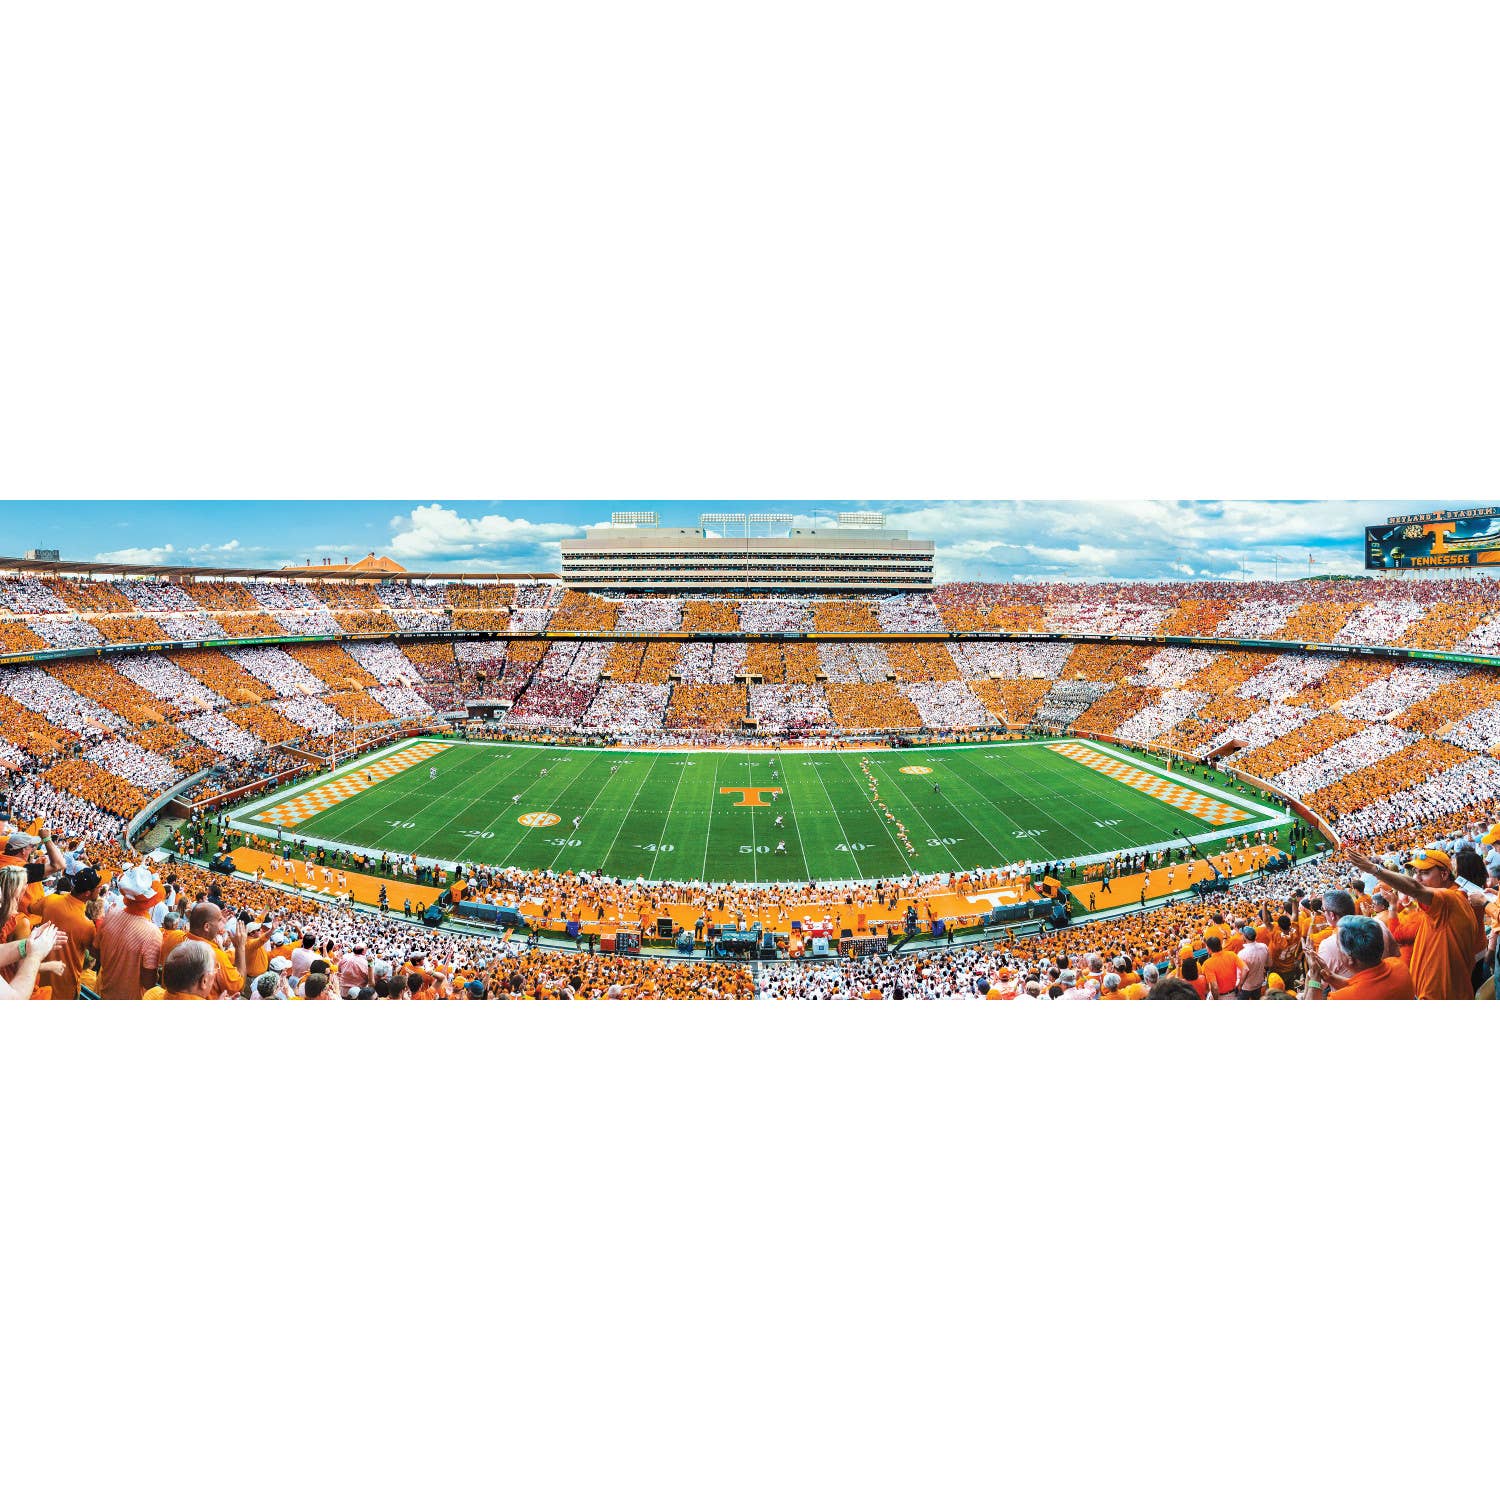 Tennessee Volunteers Panoramic Jigsaw Puzzle-Games and Puzzles > Toys & Games > Puzzles > Jigsaw Puzzles-Quinn's Mercantile